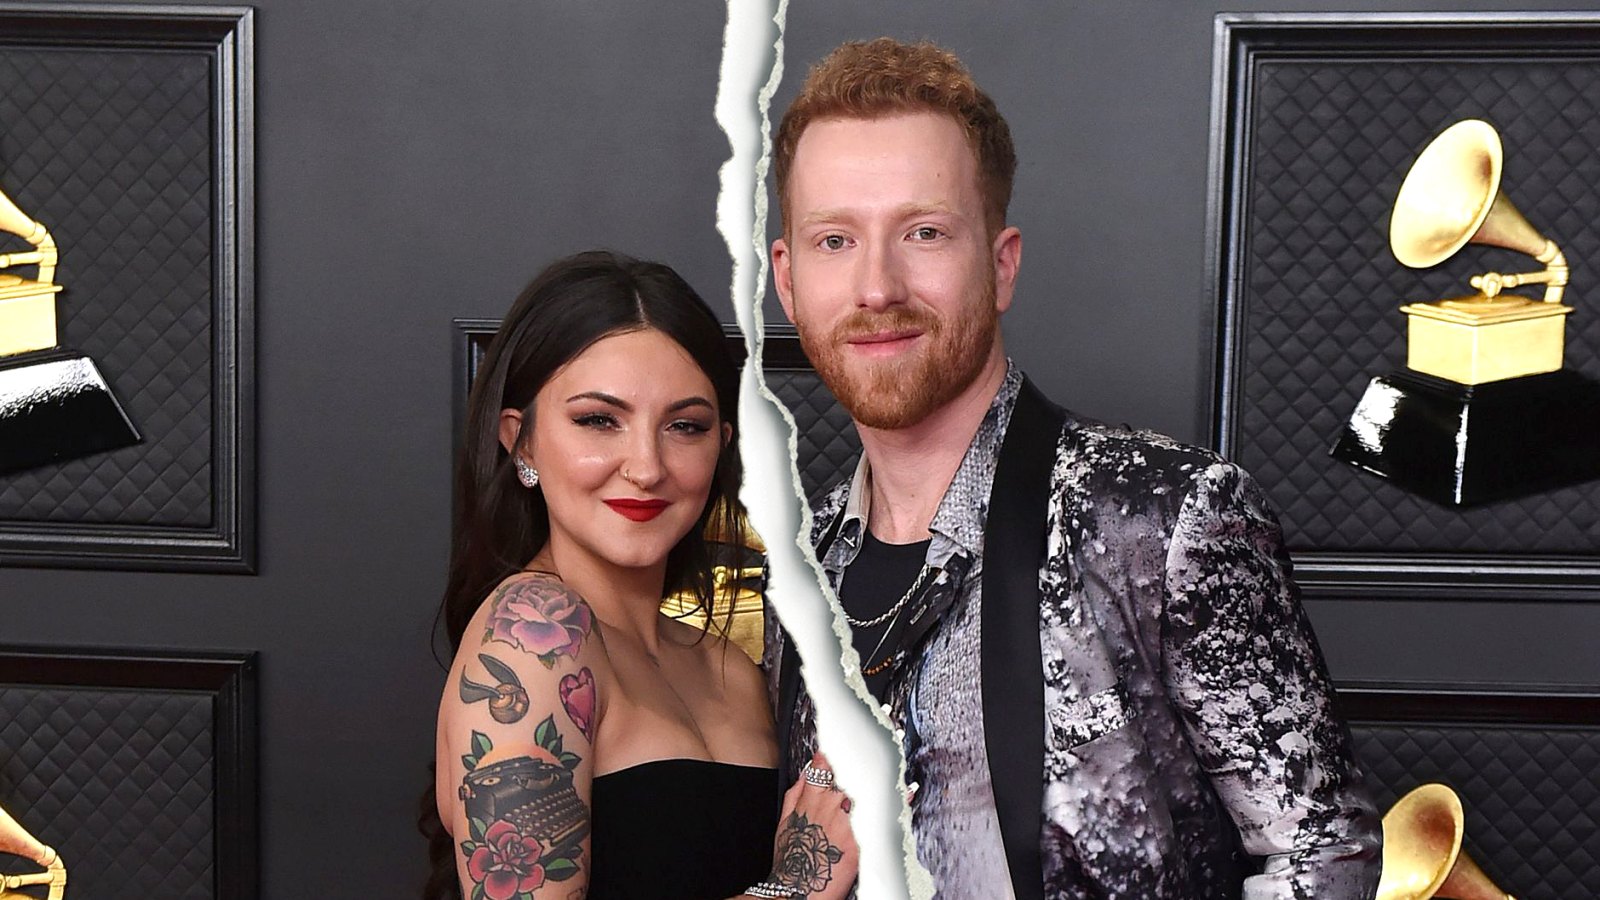 Julia Michaels and JP Saxe Split After 3 Years, Tease Breakup in Song Lyrics